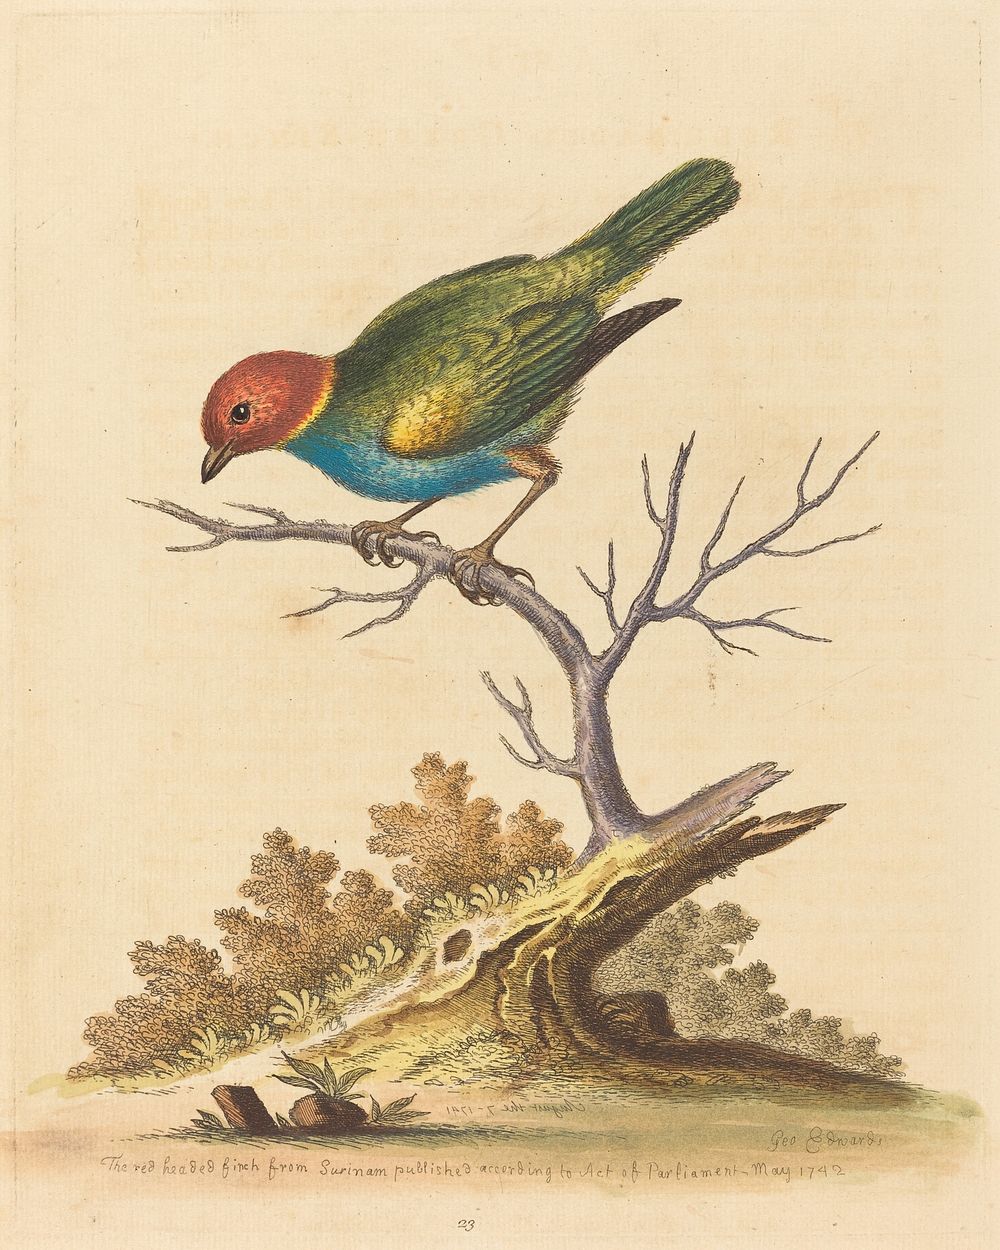 The Red-Headed Finch from Surinam (1741) print in high resolution by George Edwards.  